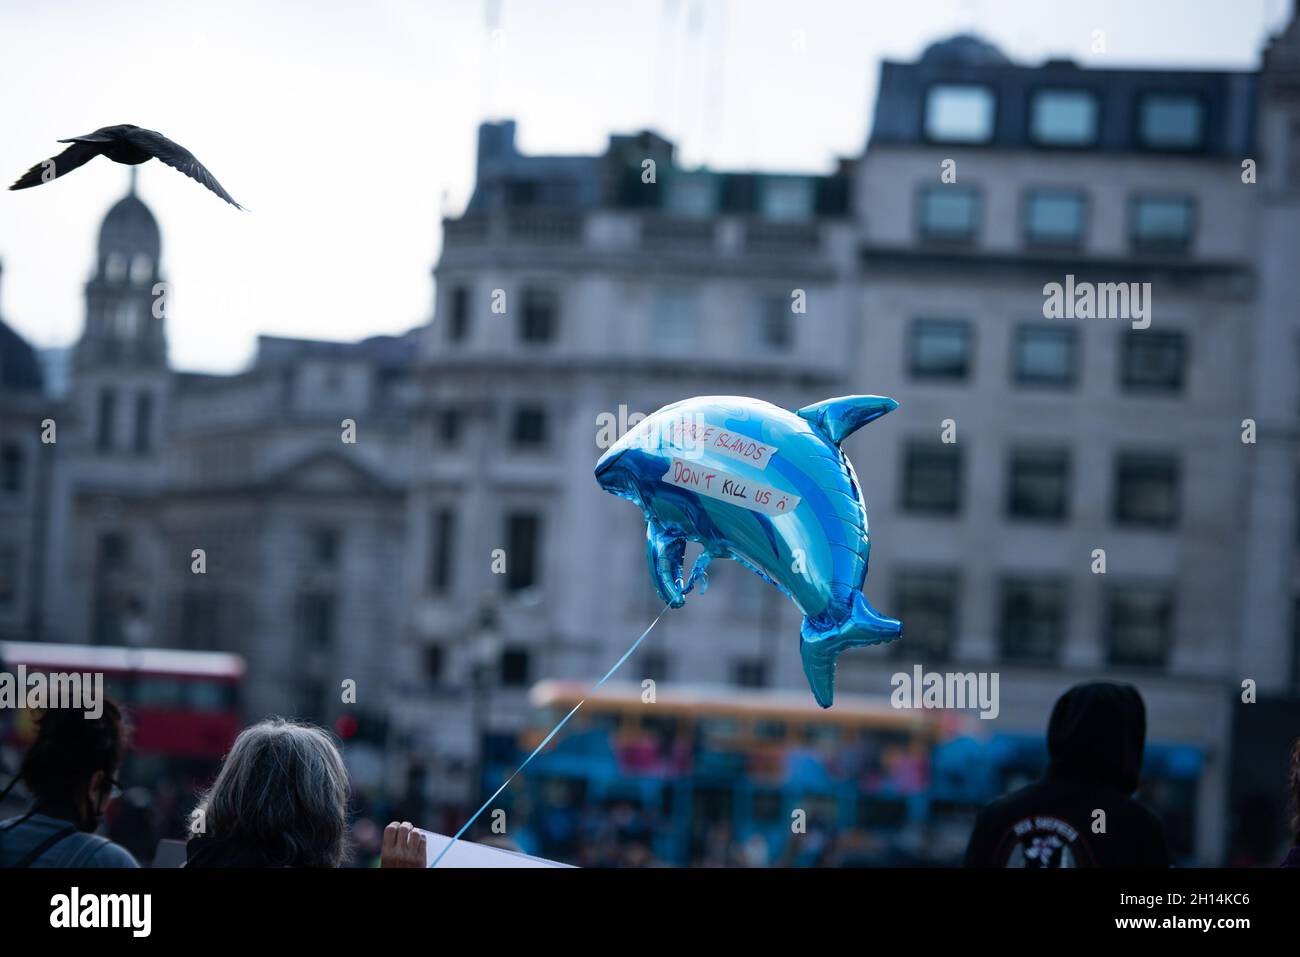 London, UK. 16th Oct, 2021. An activist holds a dolphin balloon during the Stop the Whale and Dolphin Slaughter Protest.Born Free's Policy Advisor Dominic Dyer calls for sanctions NOW to end the shameful Faroe Islands slaughter of whales and dolphins. The brutal slaughter of more than 1,400 white-sided dolphins in the Faroe Islands has triggered huge anger and revulsion around the world, and once again brought global attention to the long and bloody history of whale and dolphin-killing in this beautiful but isolated archipelago 200 miles north-west of Scotland. Credit: SOPA Images Limited/Alam Stock Photo